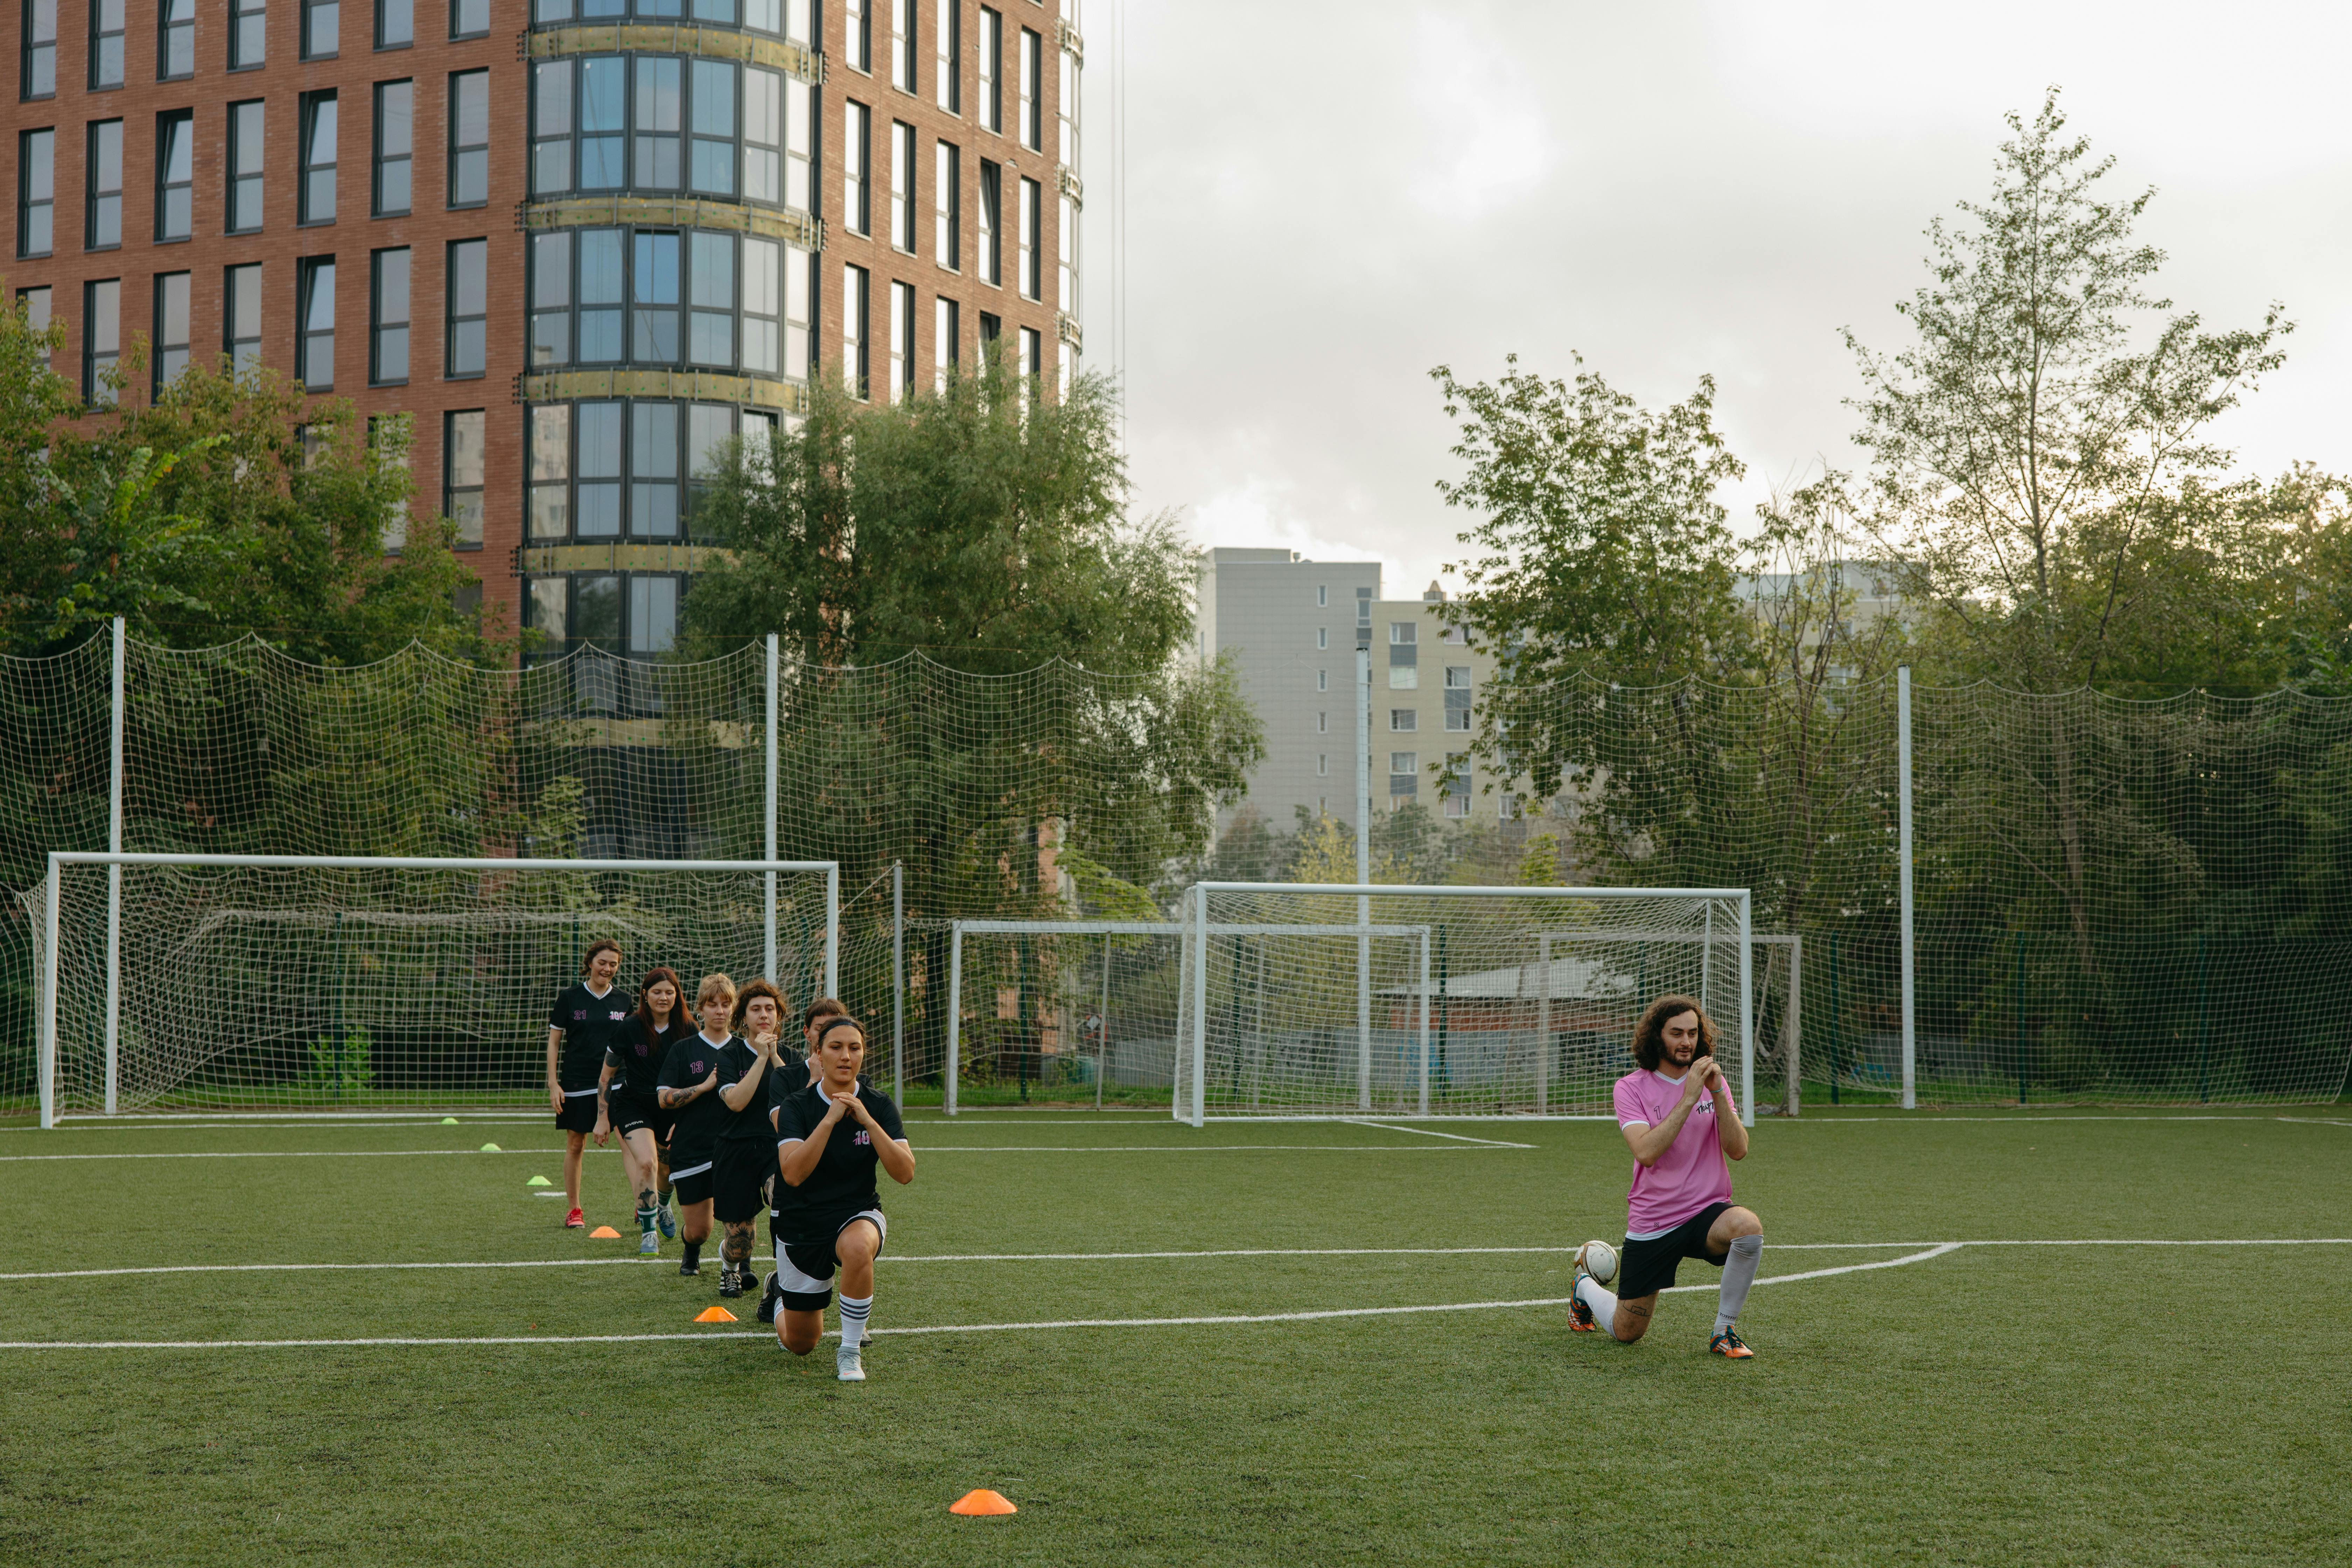 group of people training on a soccer field